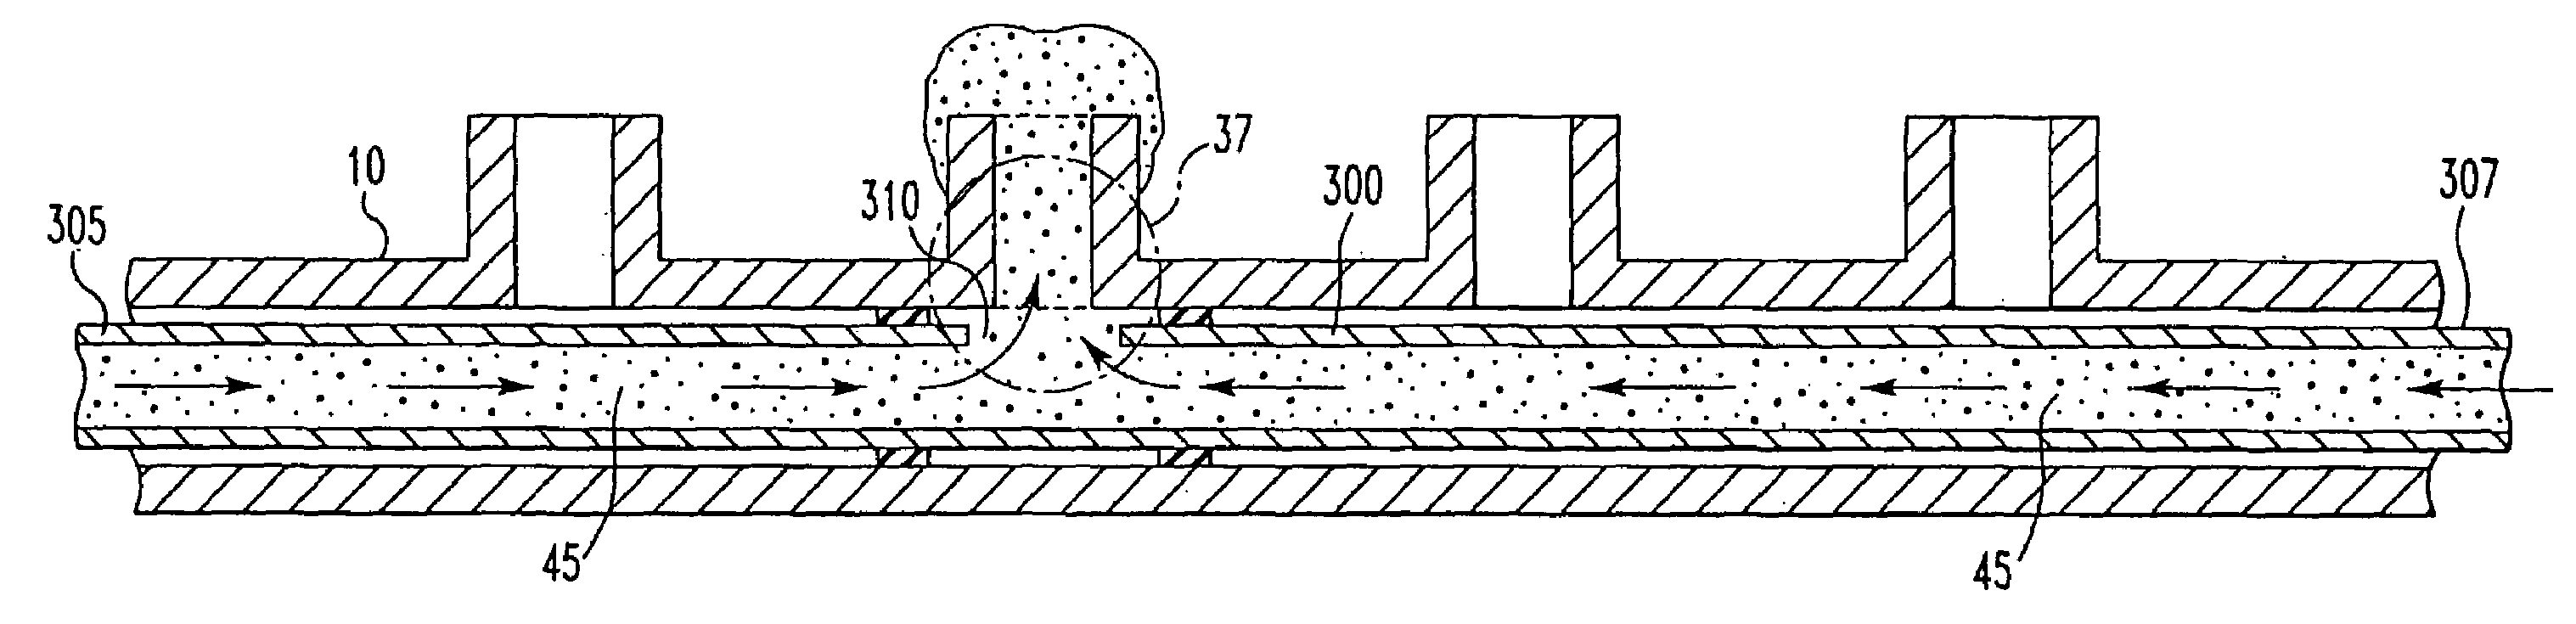 Apparatus for abrading the region of intersection between a branch outlet and a passageway in a body